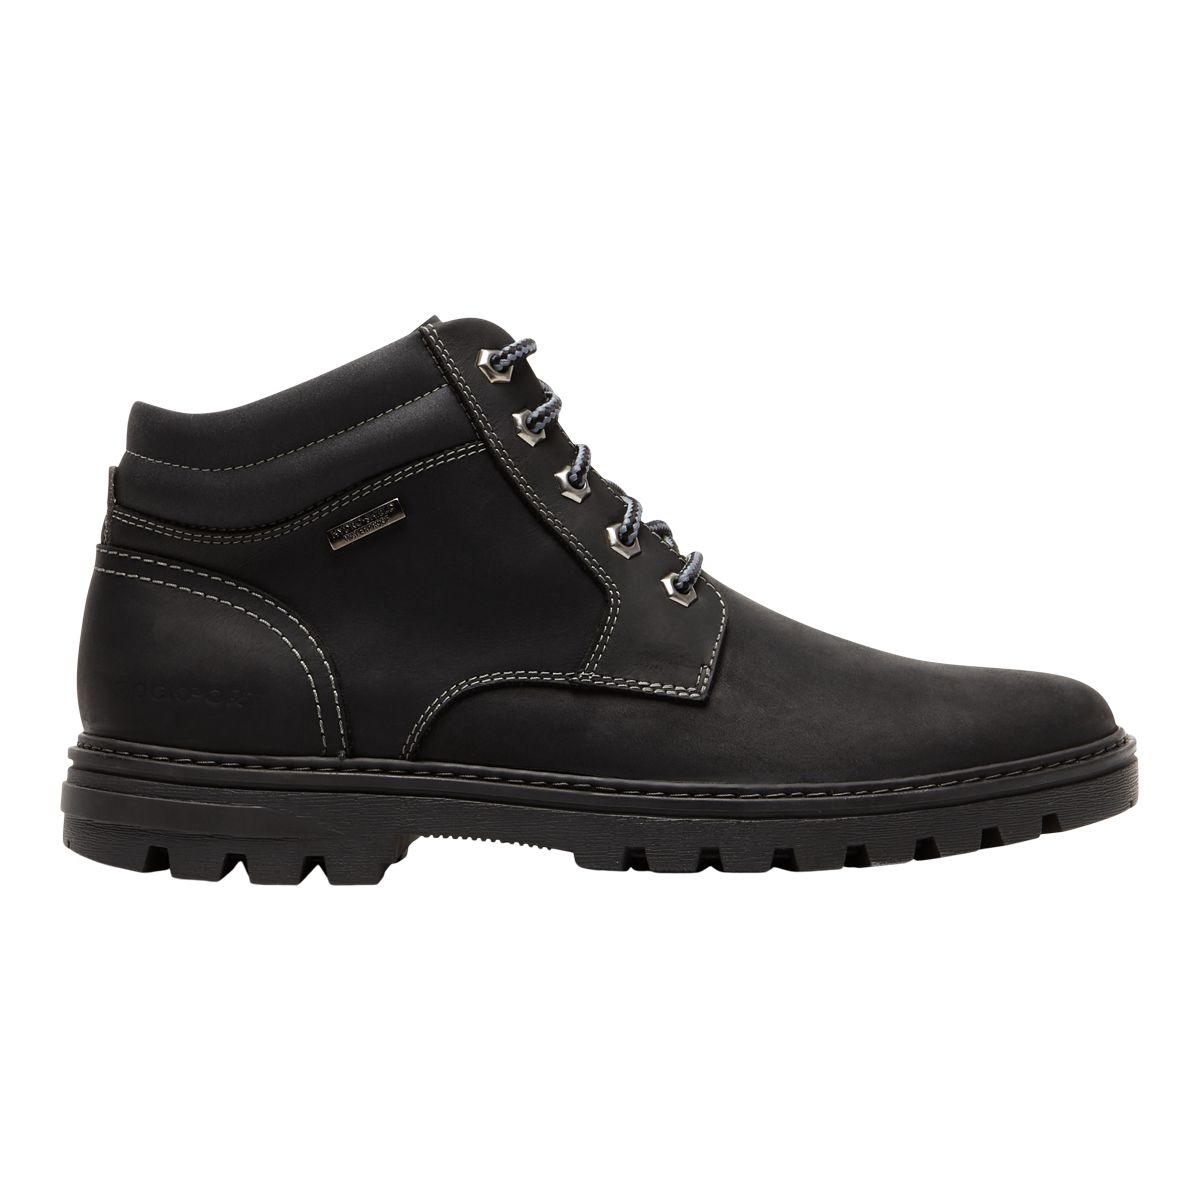 Image of Rockport Men's Weather or Not Boots